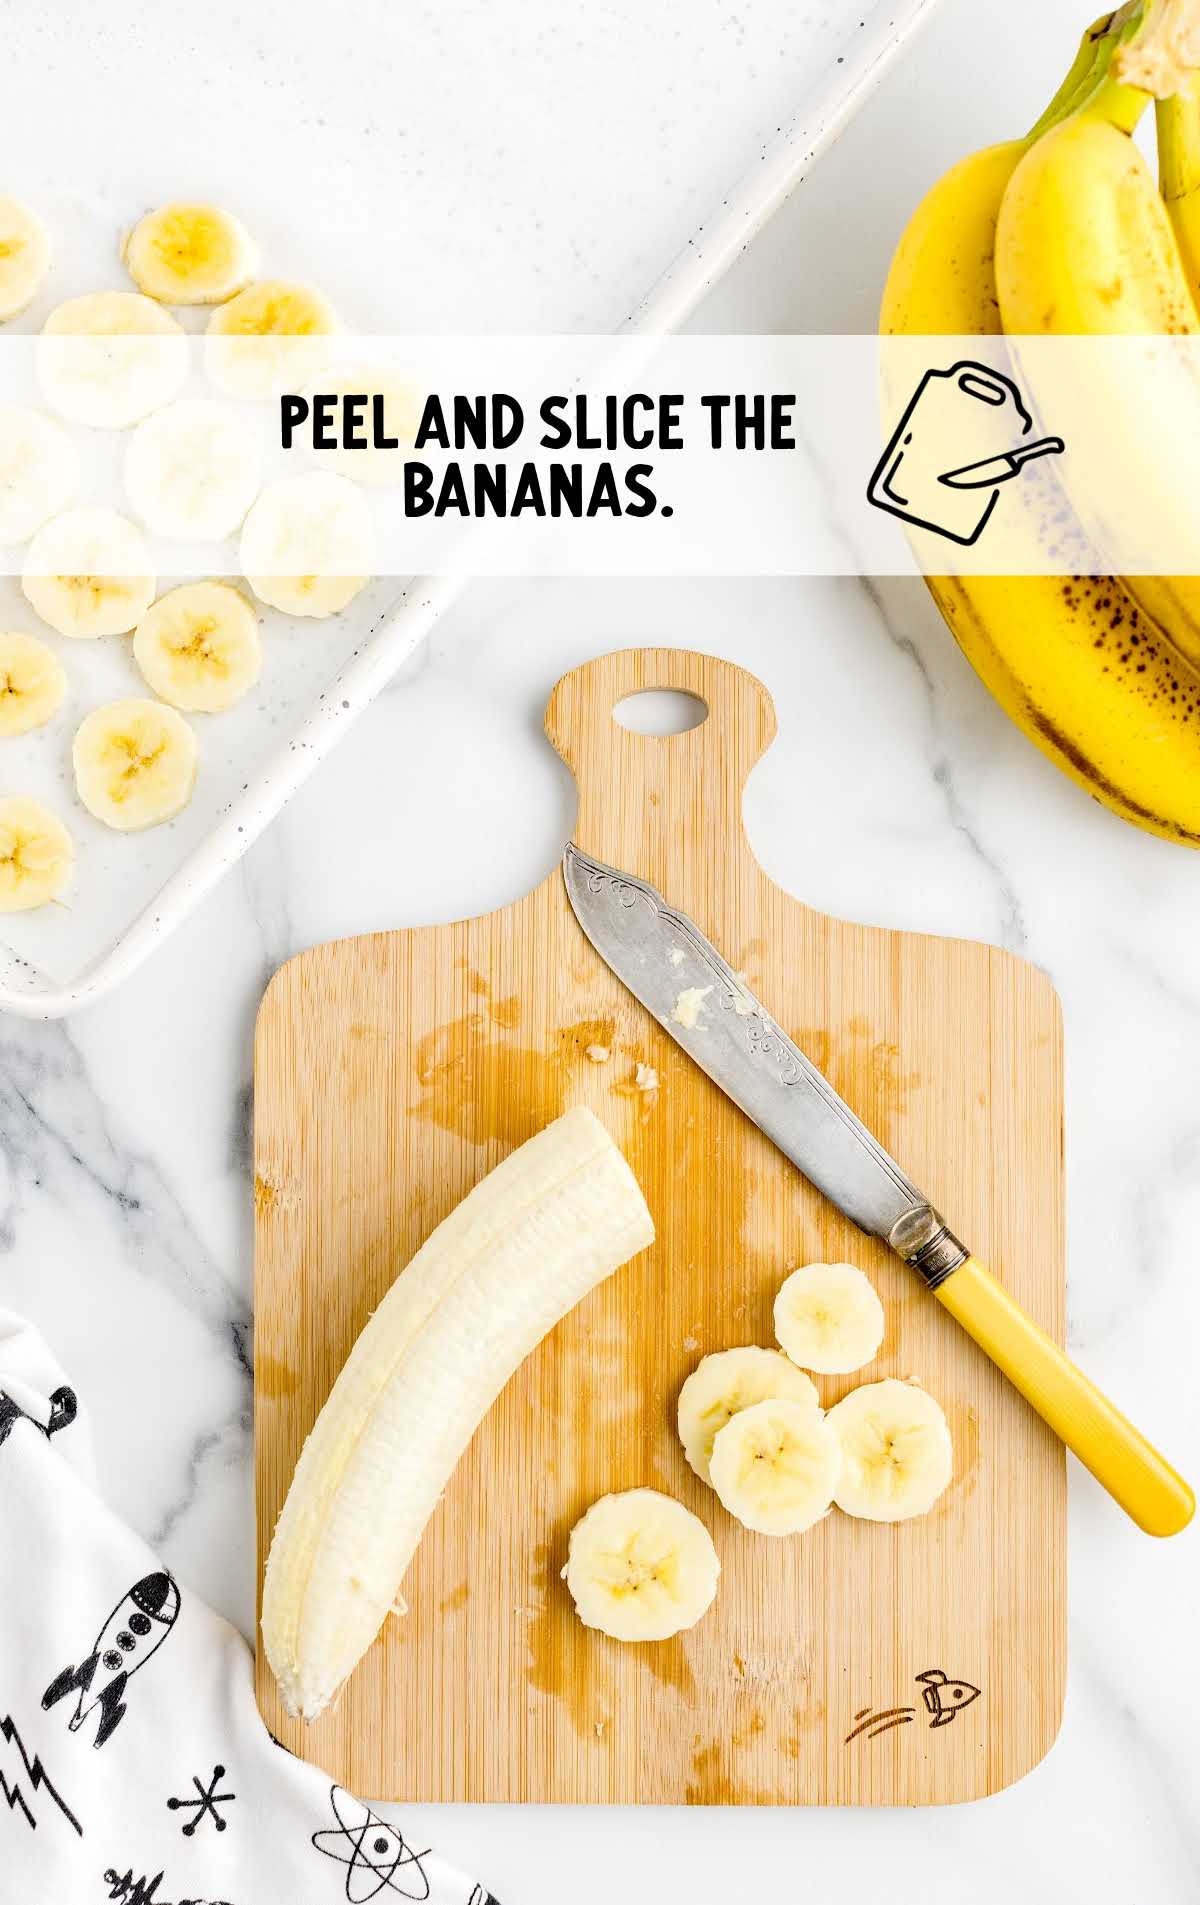 banana being peeled and sliced on a wooden cutting board